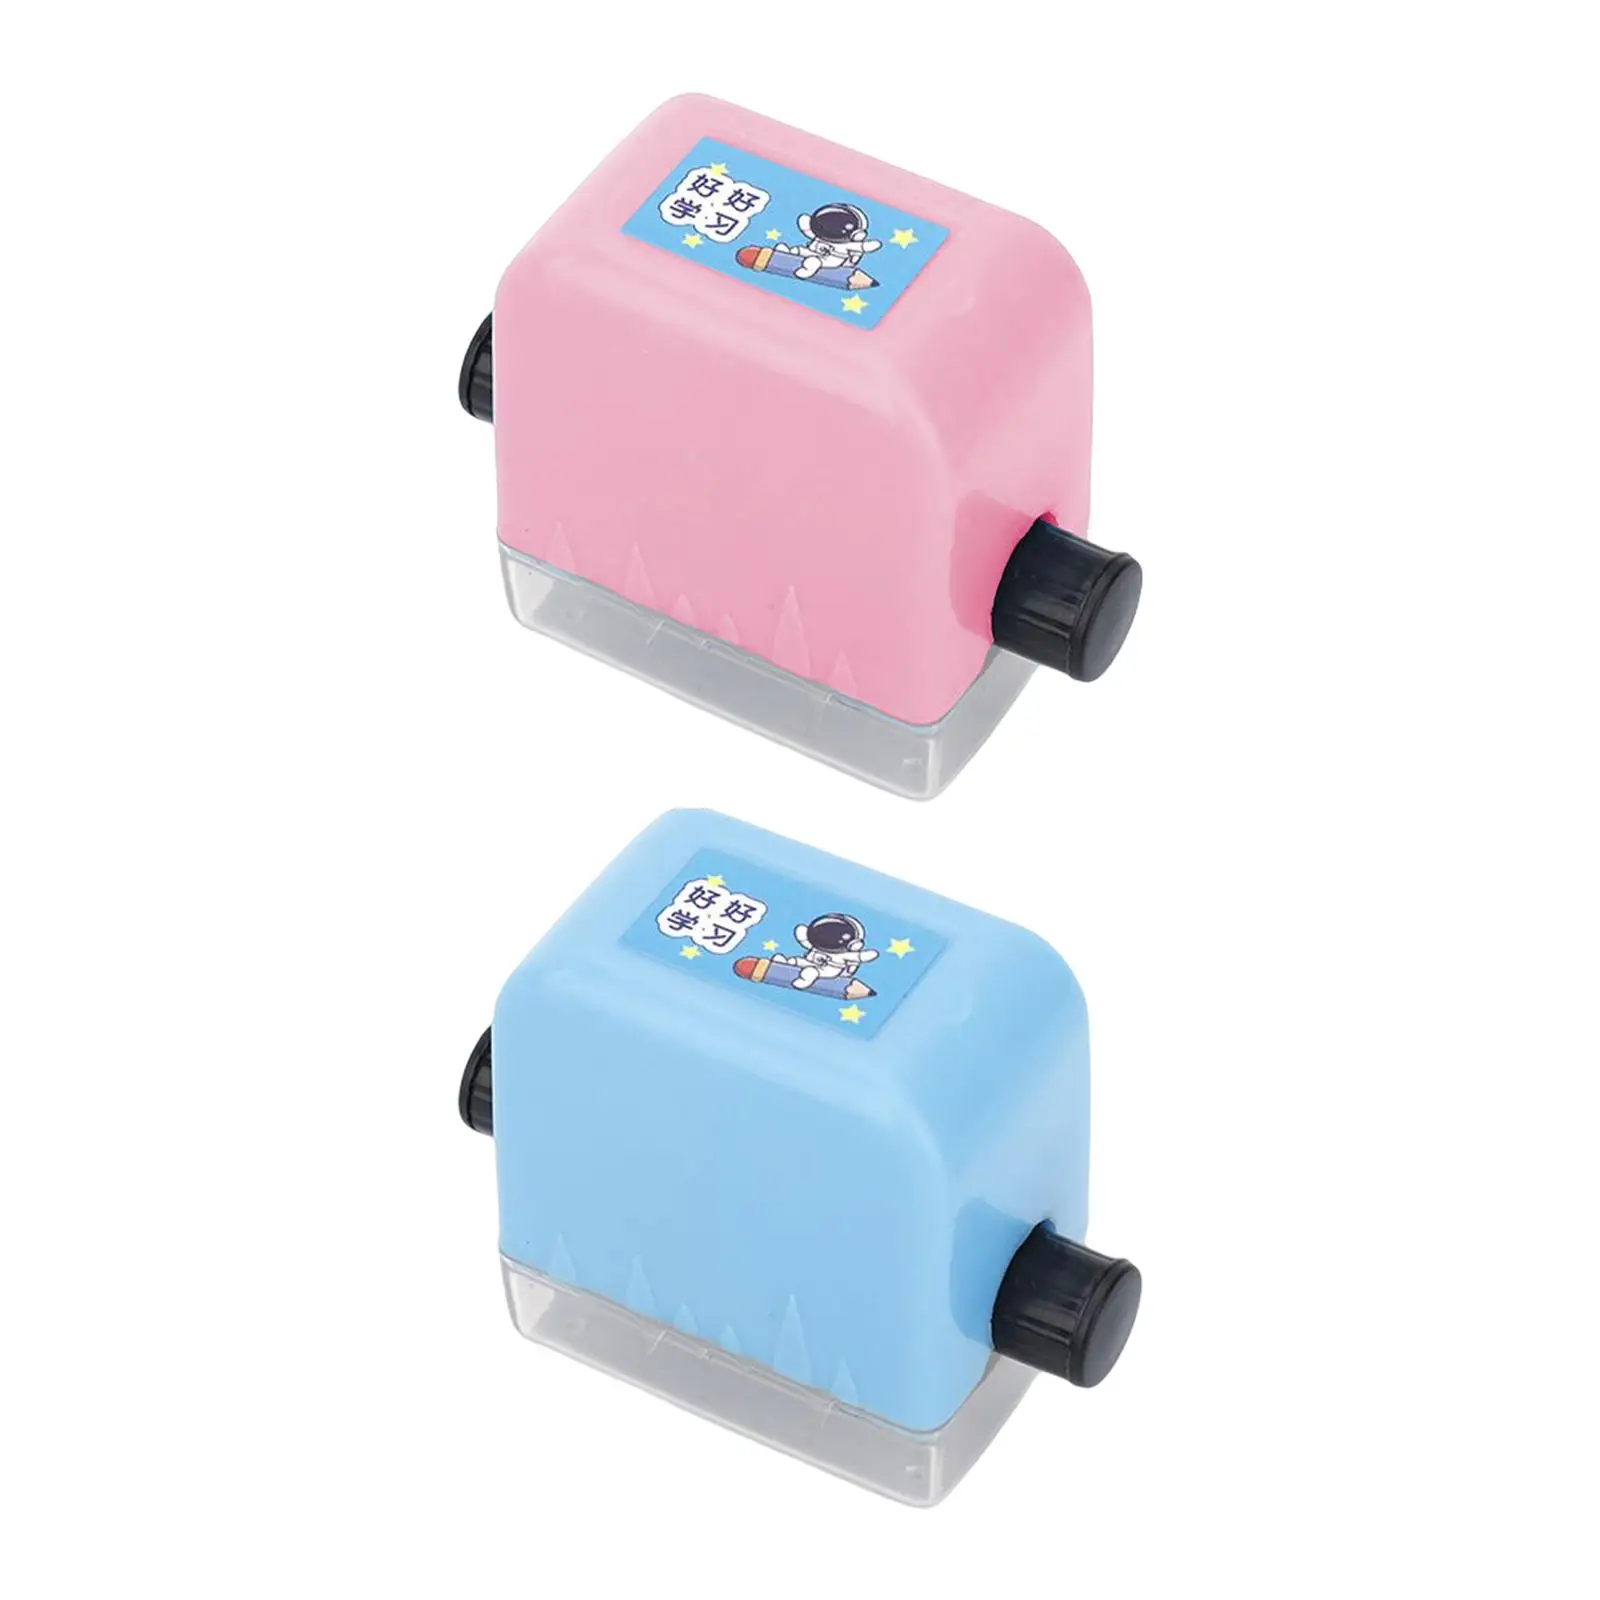 Roller Digital Teaching Stamp Math Questions Calculation Portable Interesting Number Rolling Stamp for Students Elementary